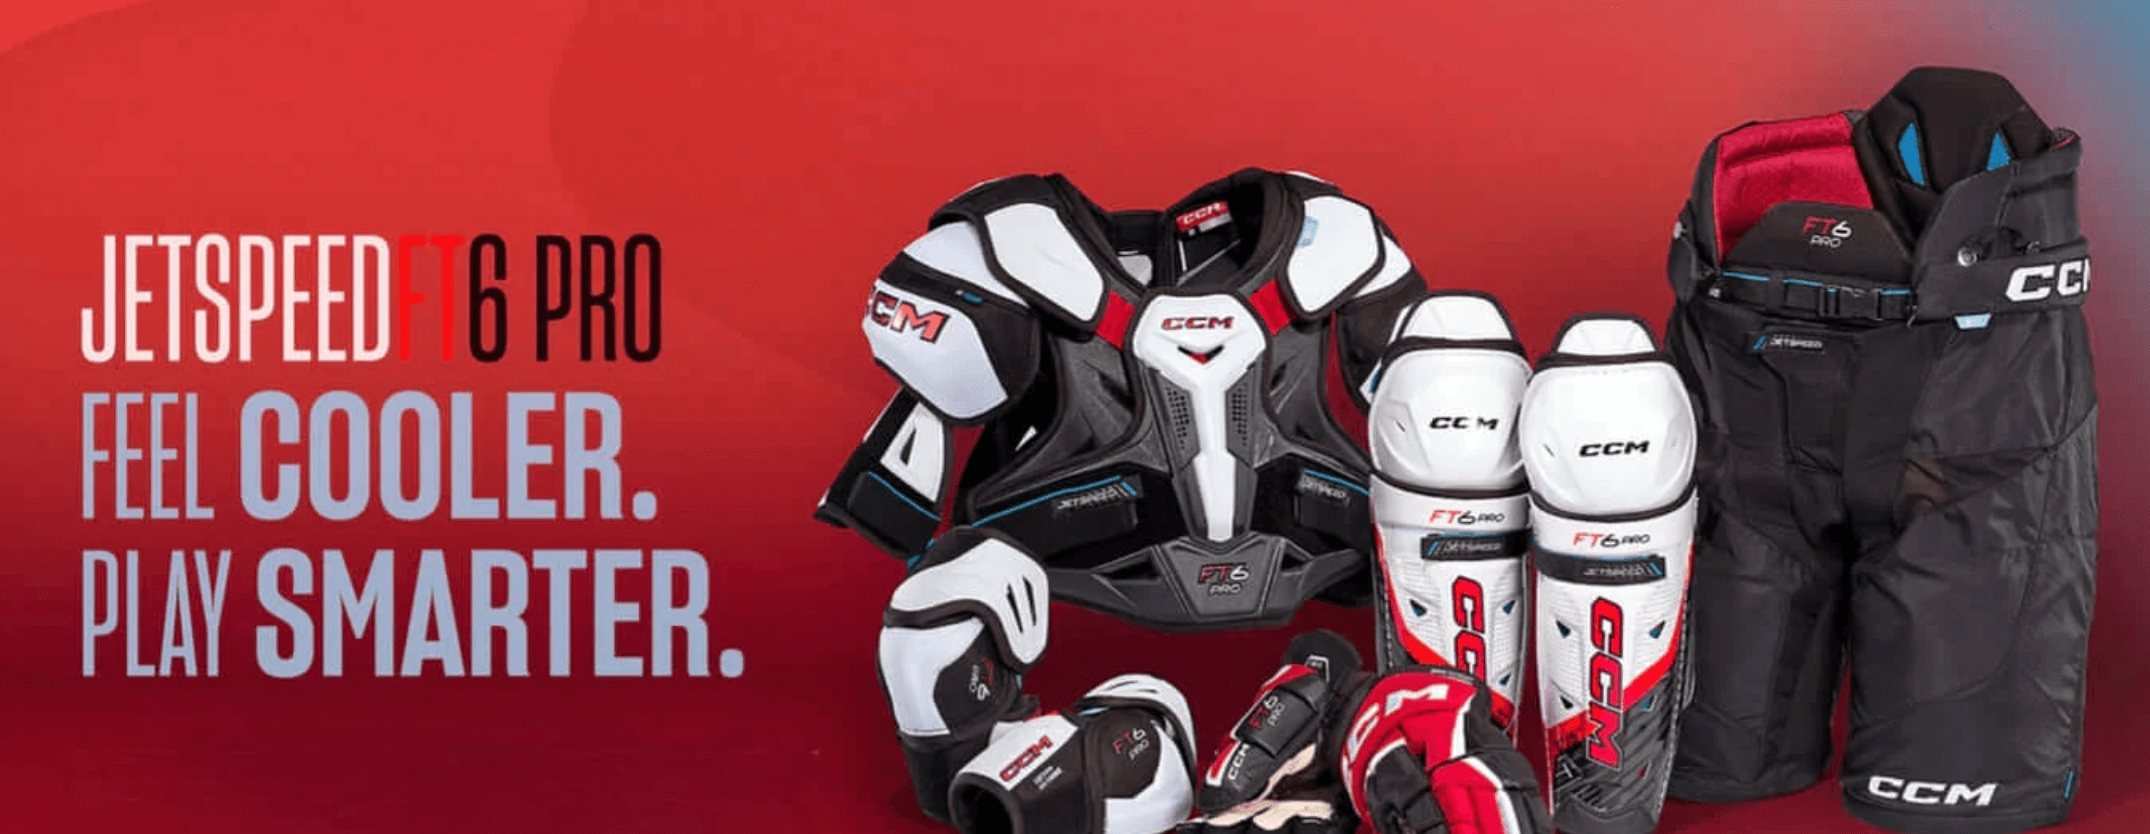 CCM Jetspeed FT6 Pro Equipment is here